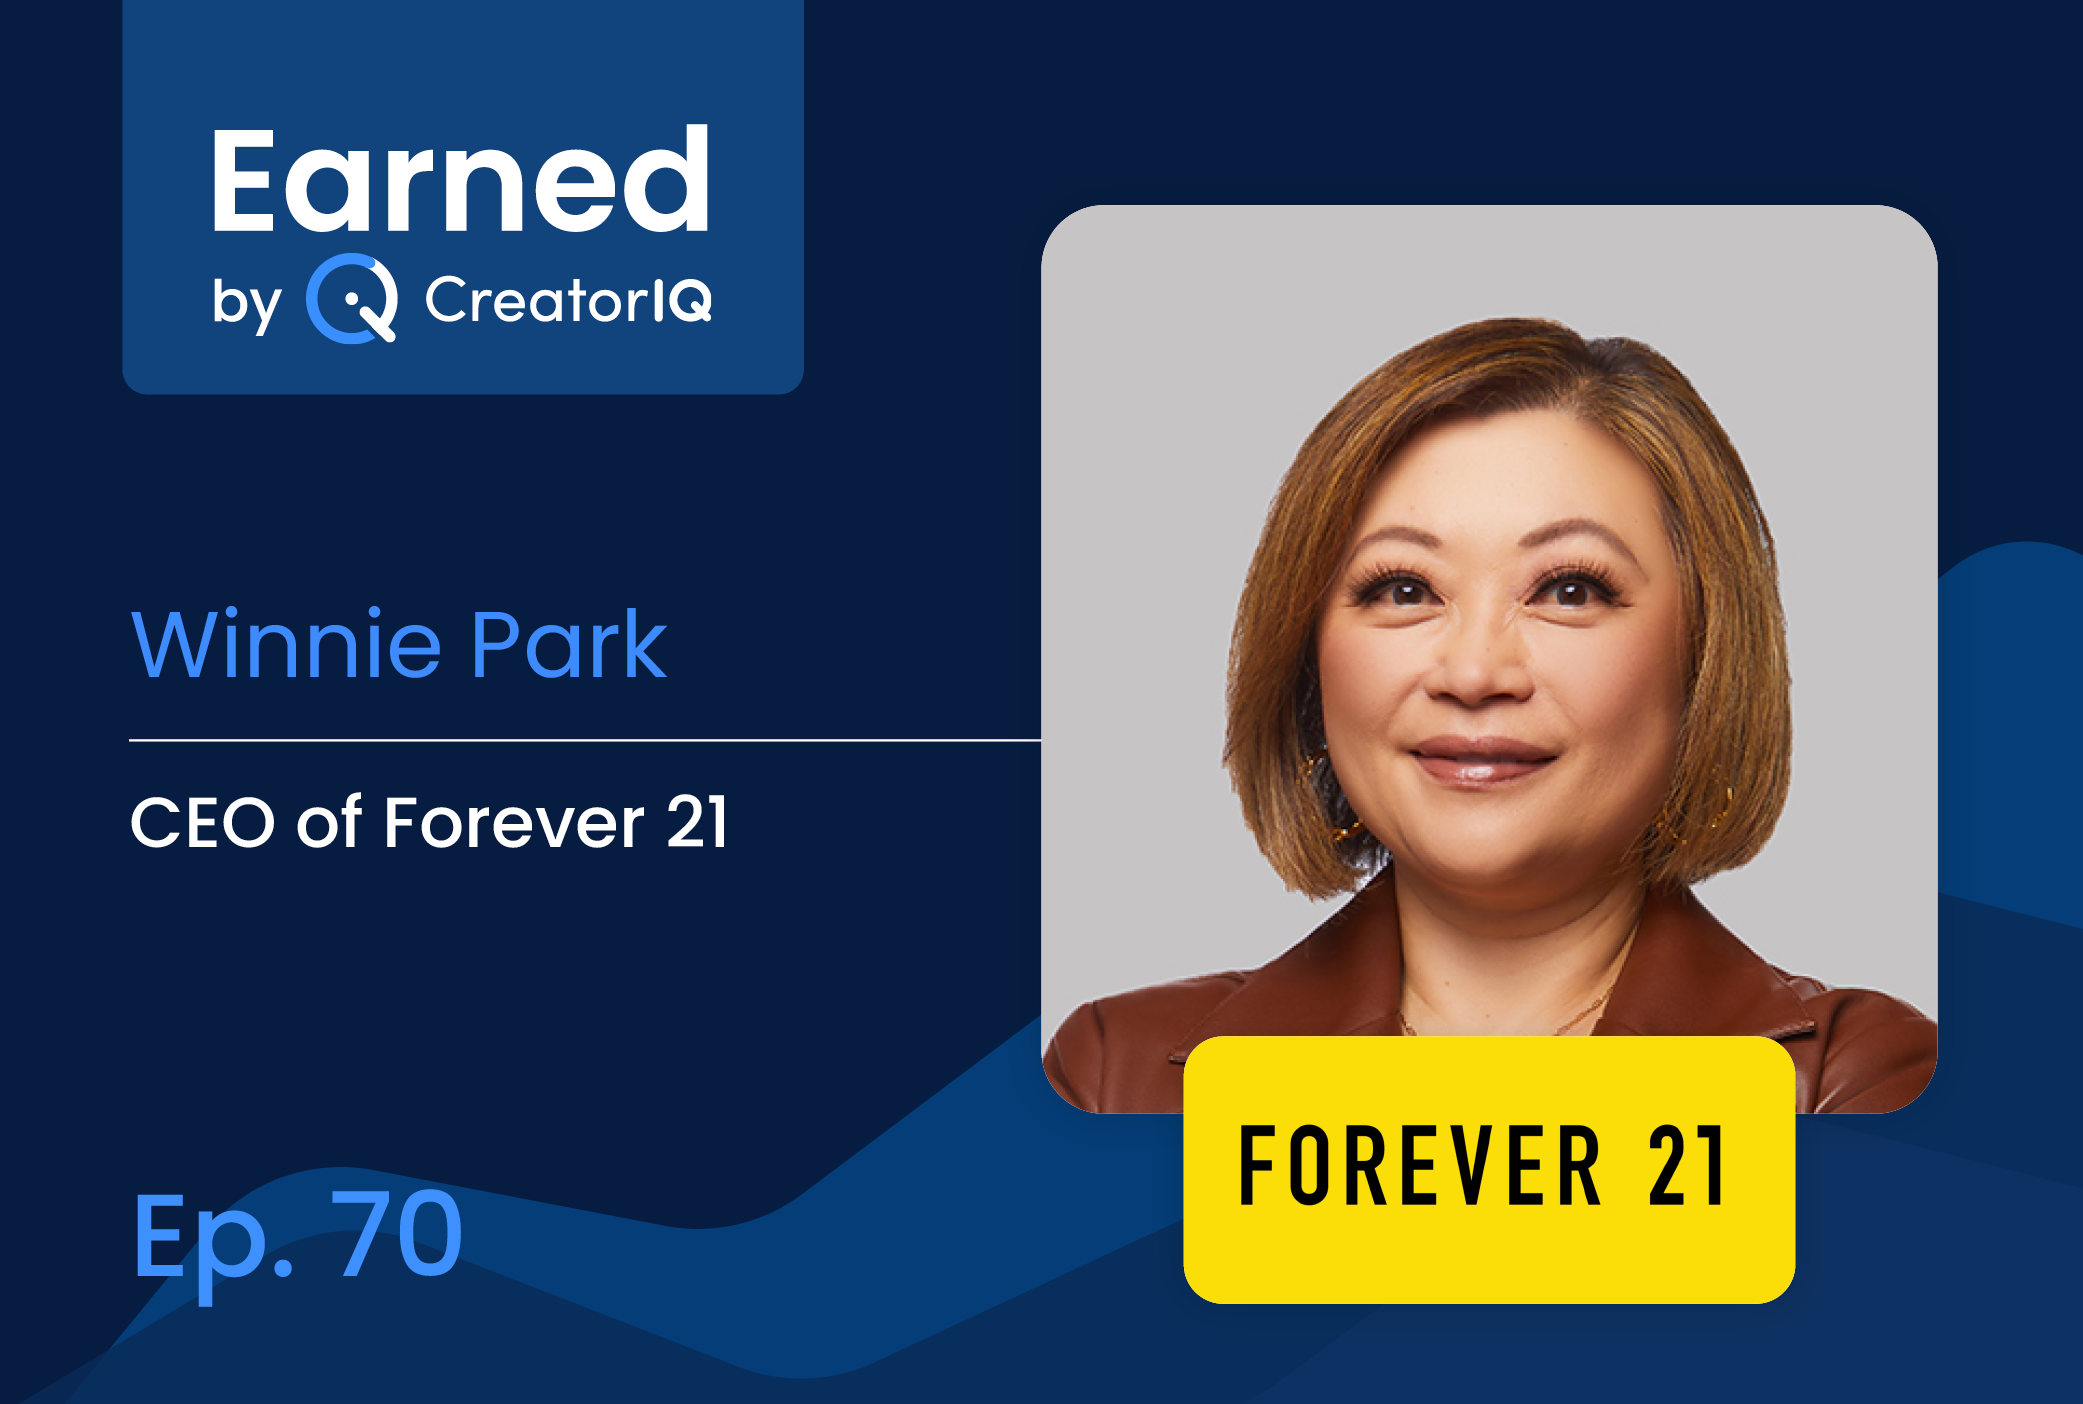 Earned Ep. 70: Forever 21 CEO Winnie Park on the Resurgence and Evolution of Retail